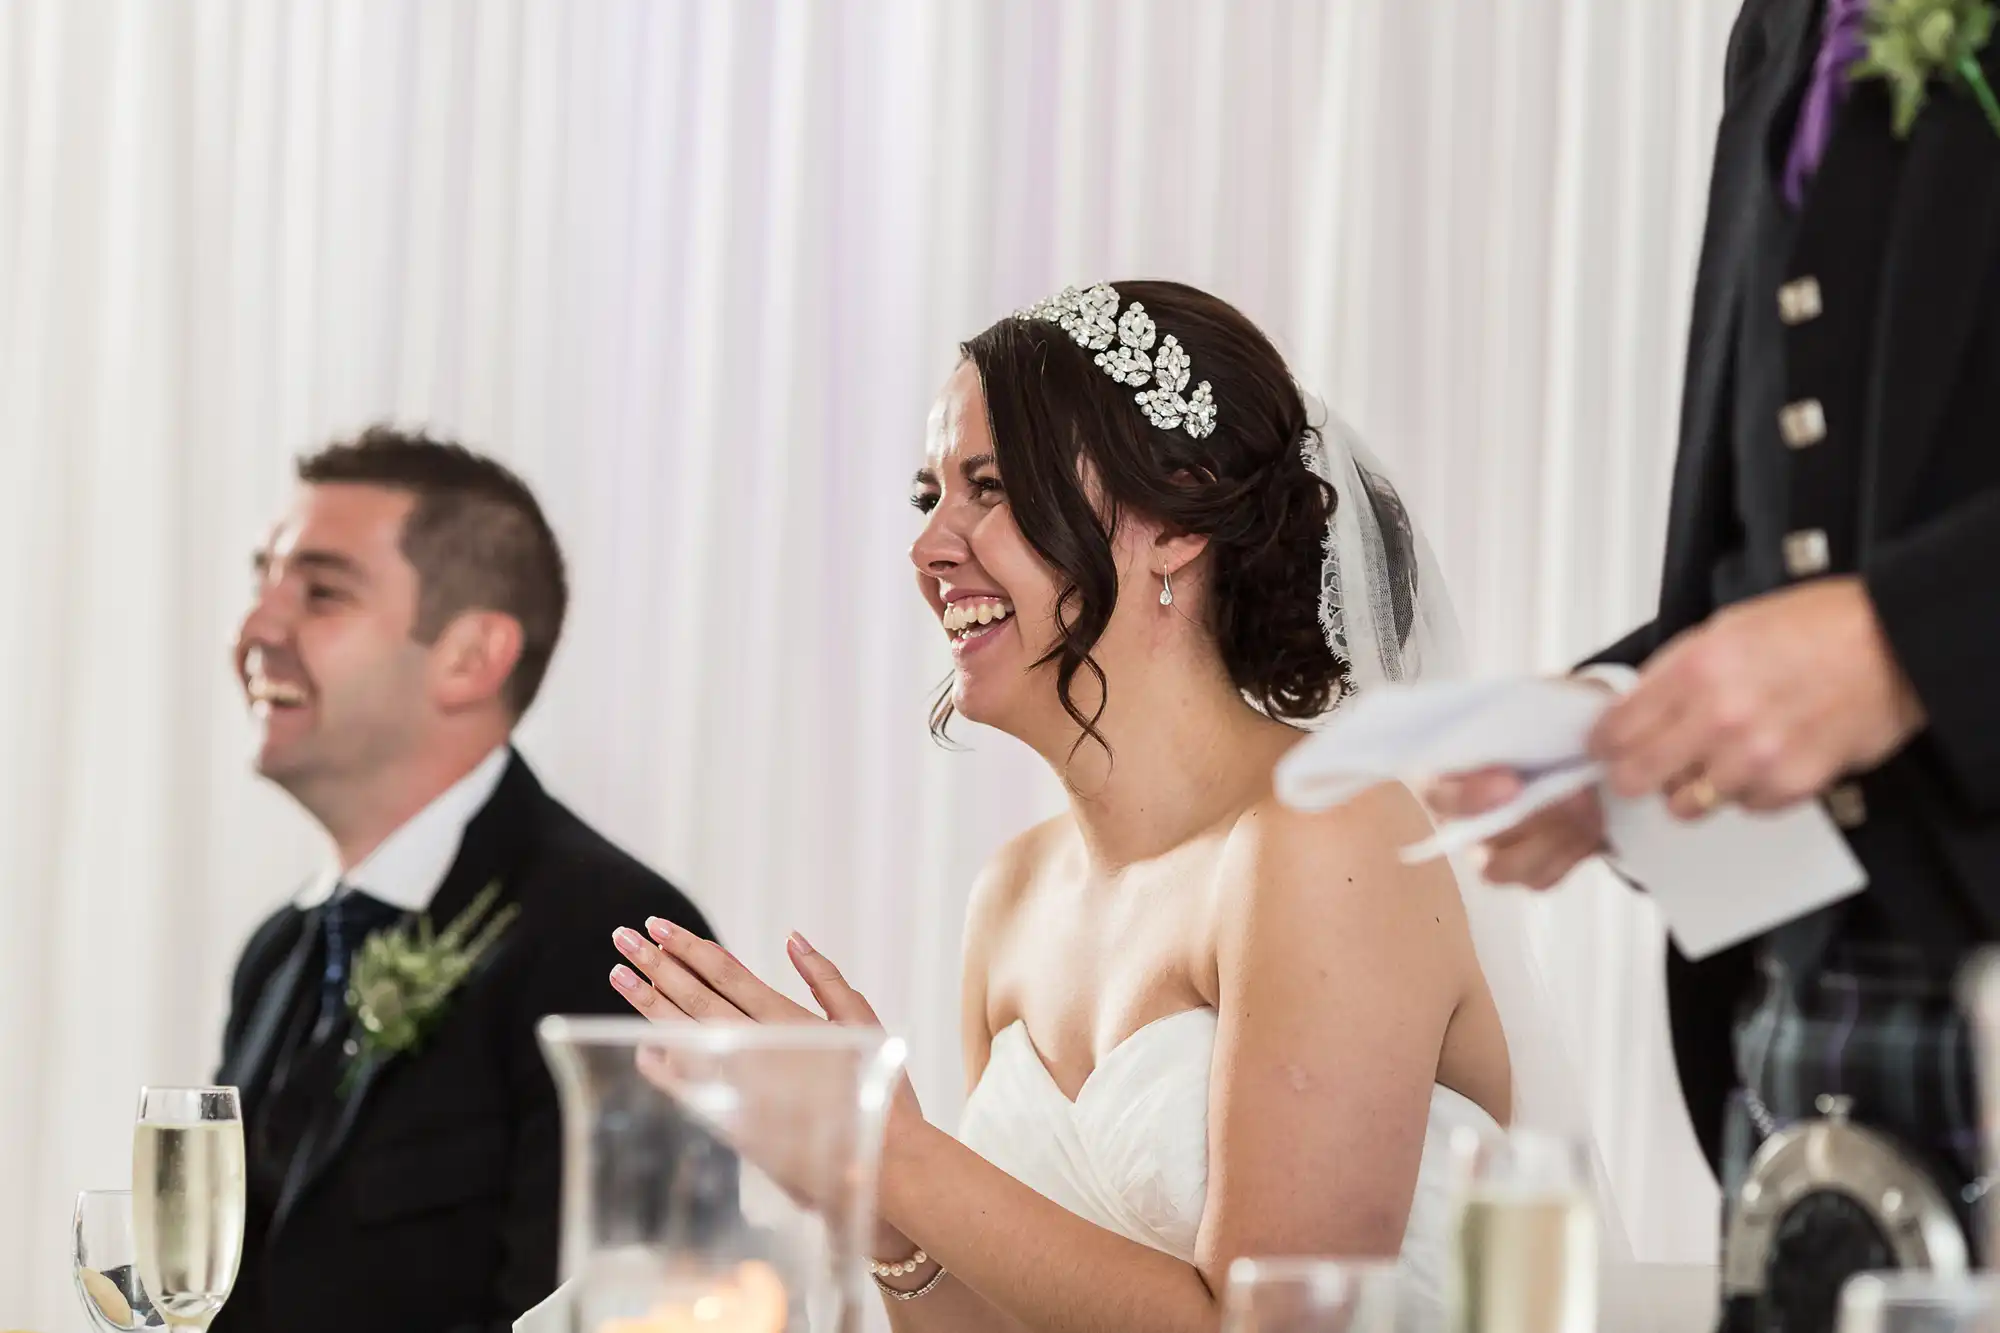 Bride laughing joyfully at a wedding reception table, wearing a white dress and floral headpiece, with a smiling groom in the background.